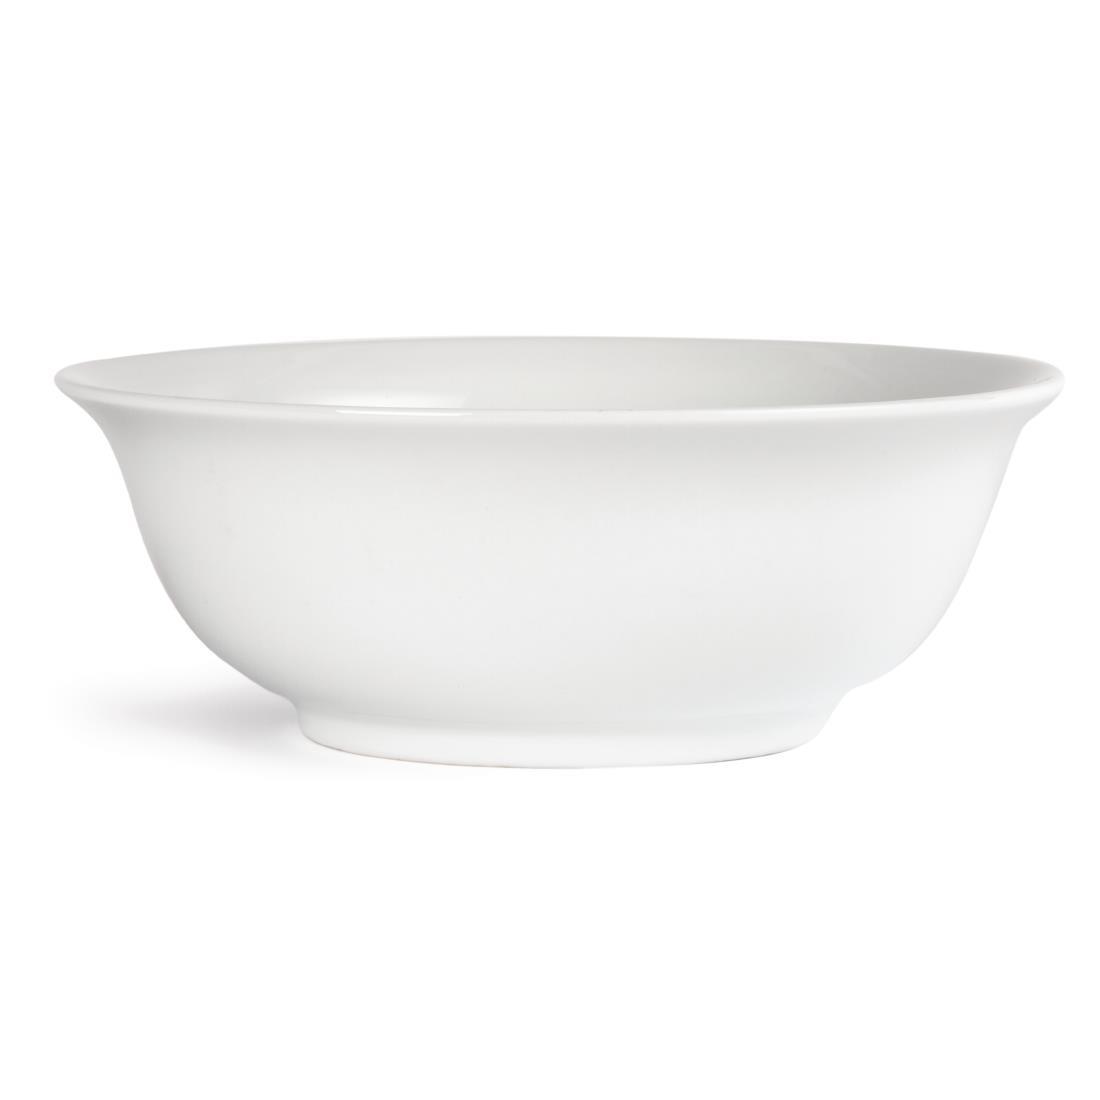 Olympia Whiteware Salad Bowls 235mm (Pack of 6) - W436  - 3